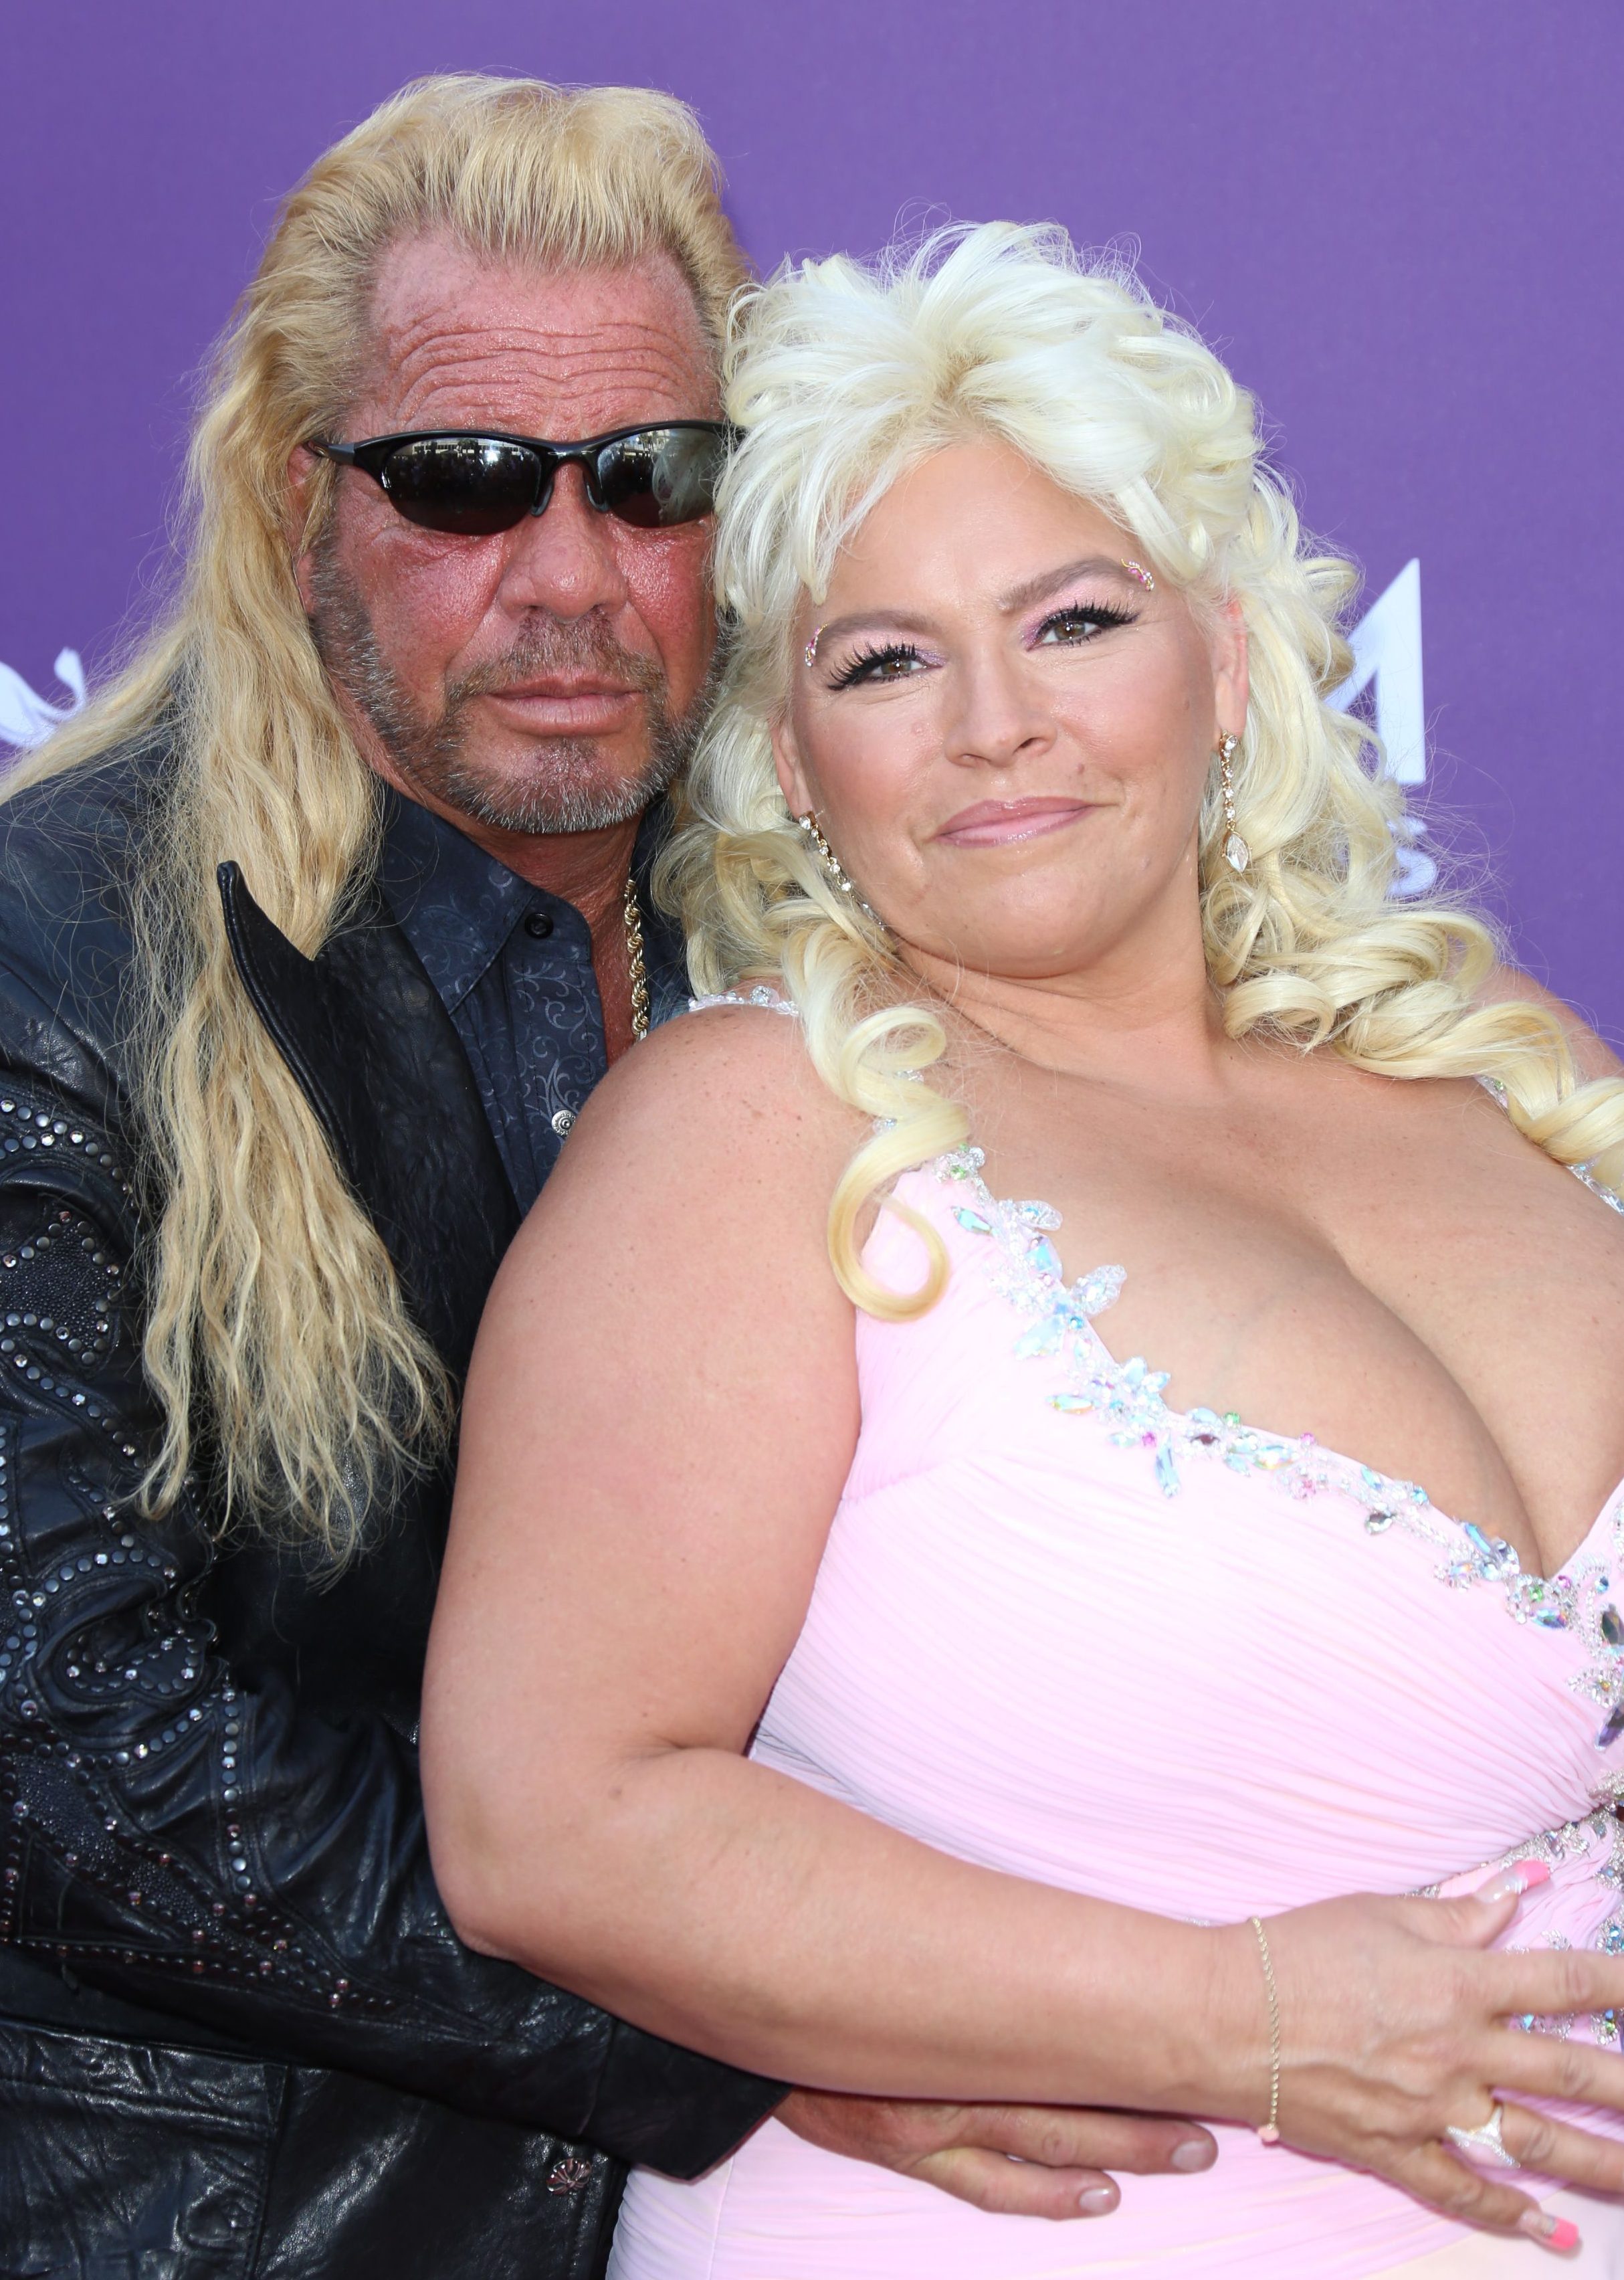 asher miller recommends Beth Chapman Naked Pics